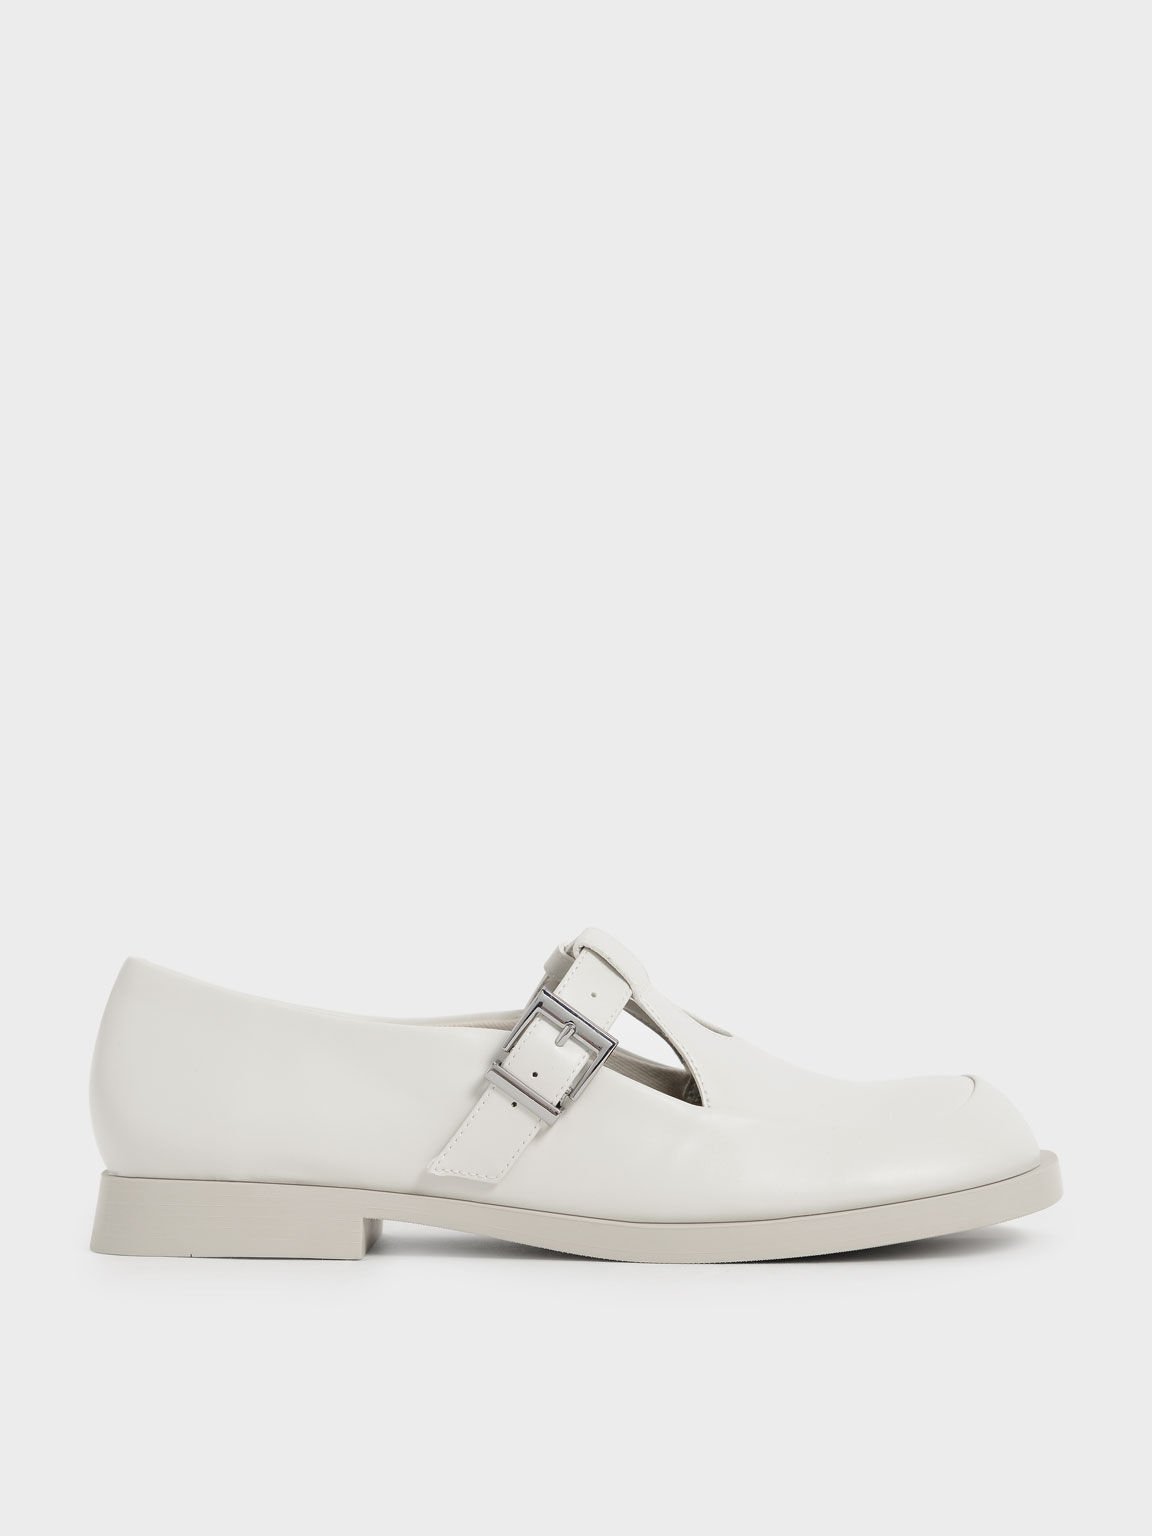 Mary Jane Buckle Loafers, Chalk, hi-res